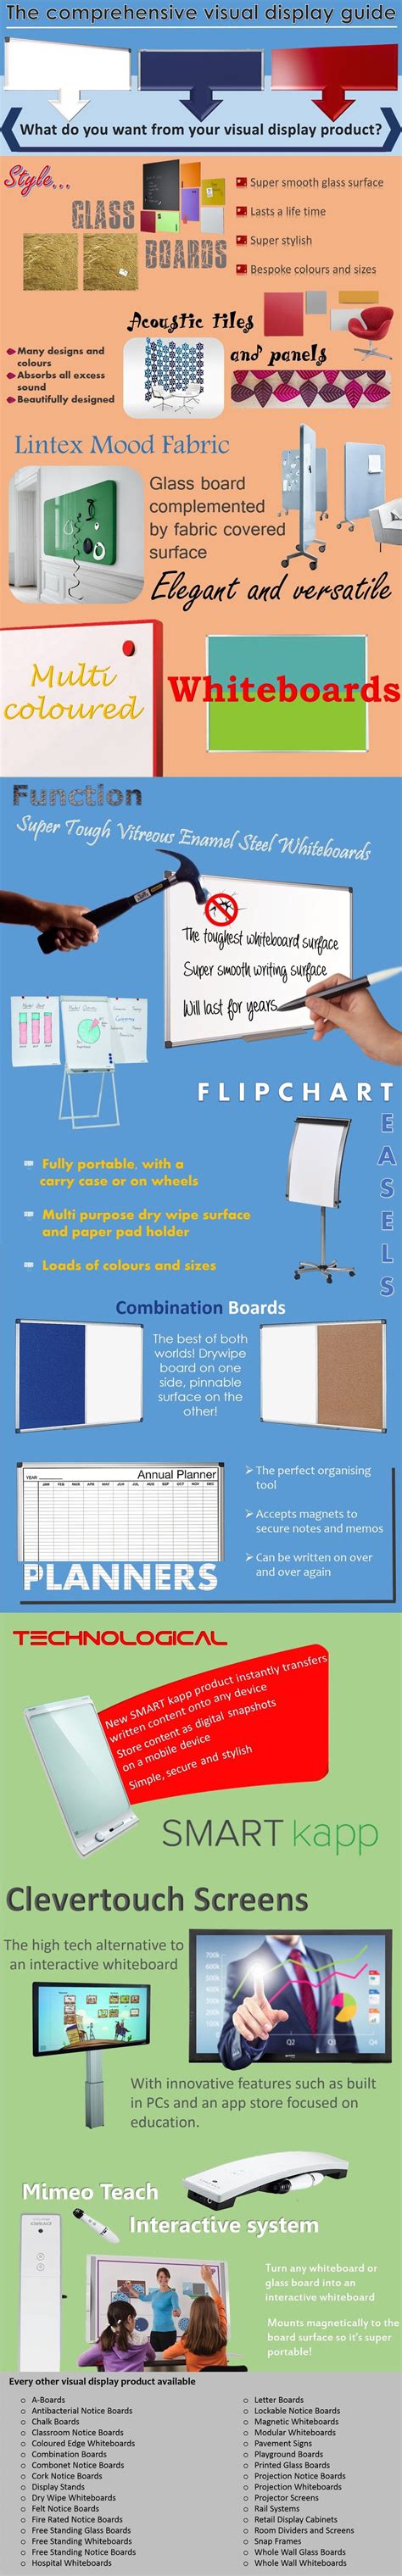 comprehensive visual display guide boards direct